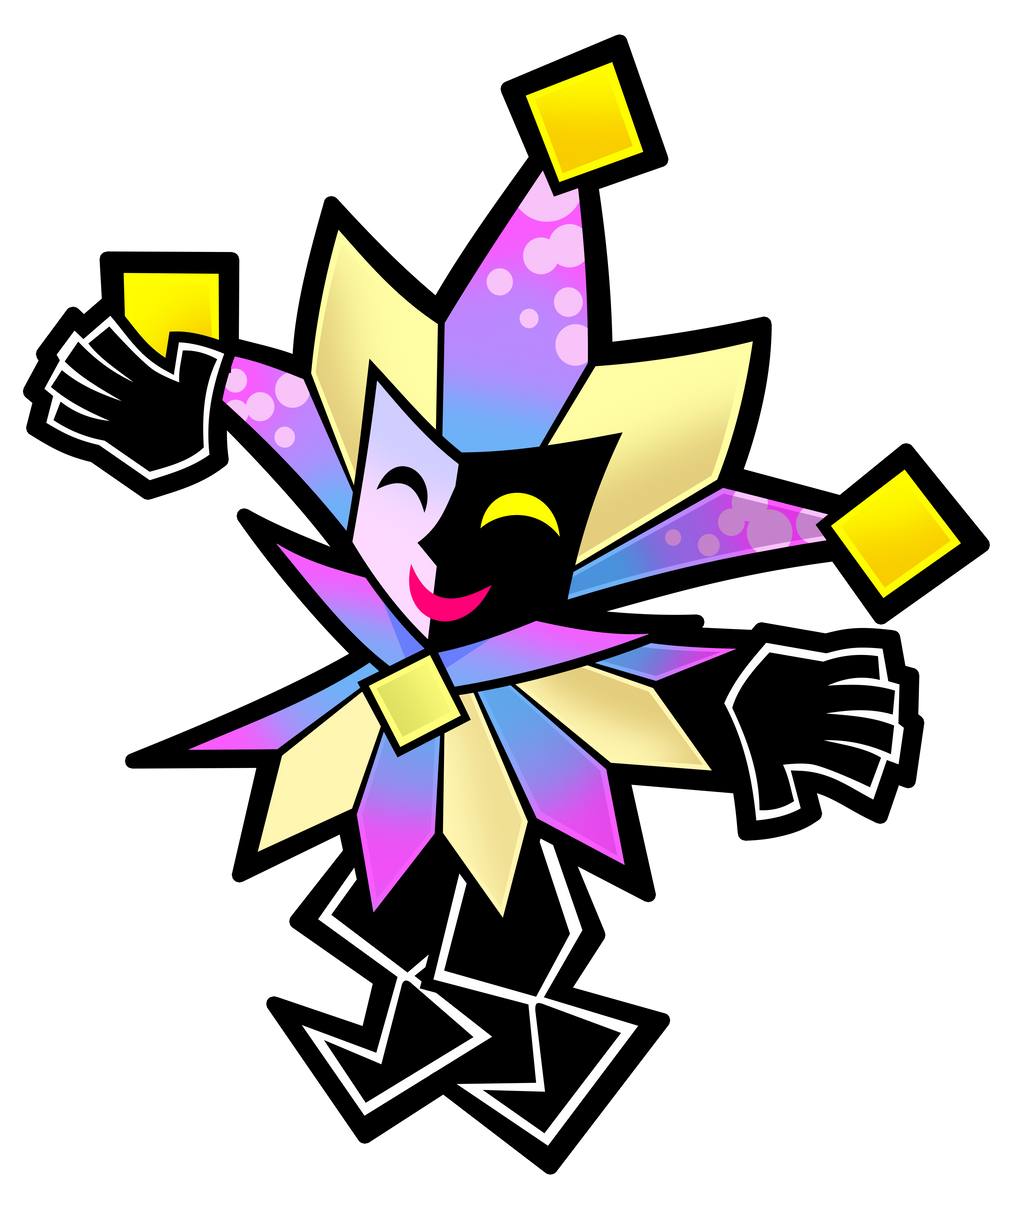 dimentio__classic___super_paper_mario_10th_by_fawfulthegreat64-db9d47m.png